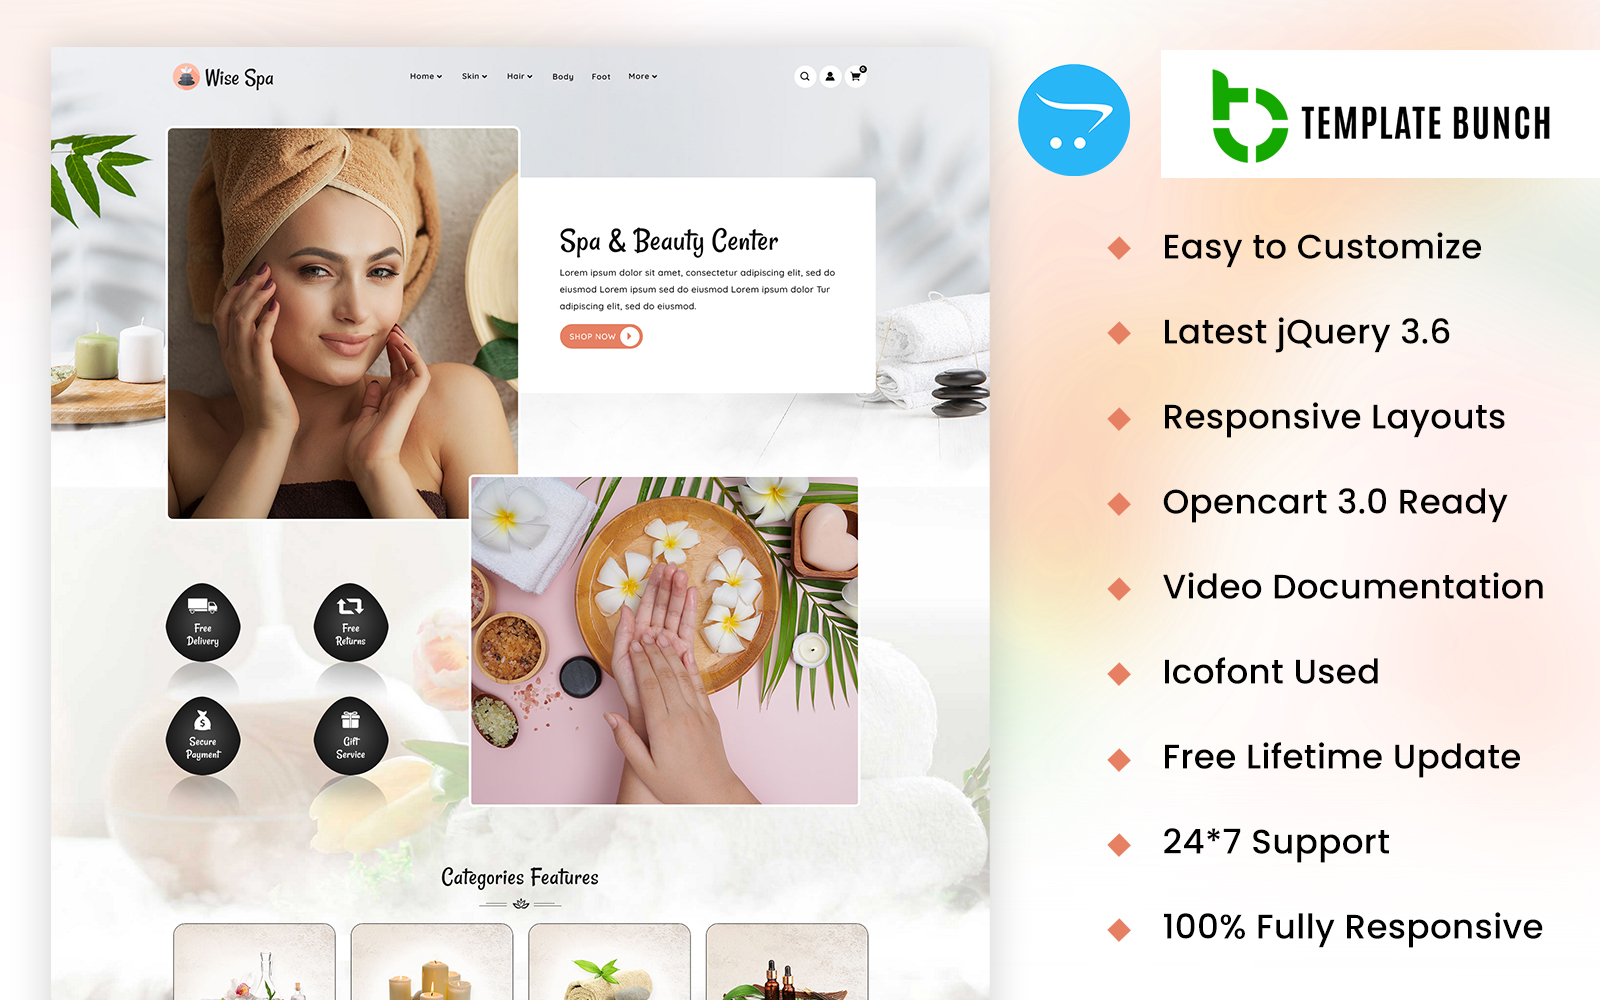 Wise Spa - Responsive OpenCart Theme for eCommerce